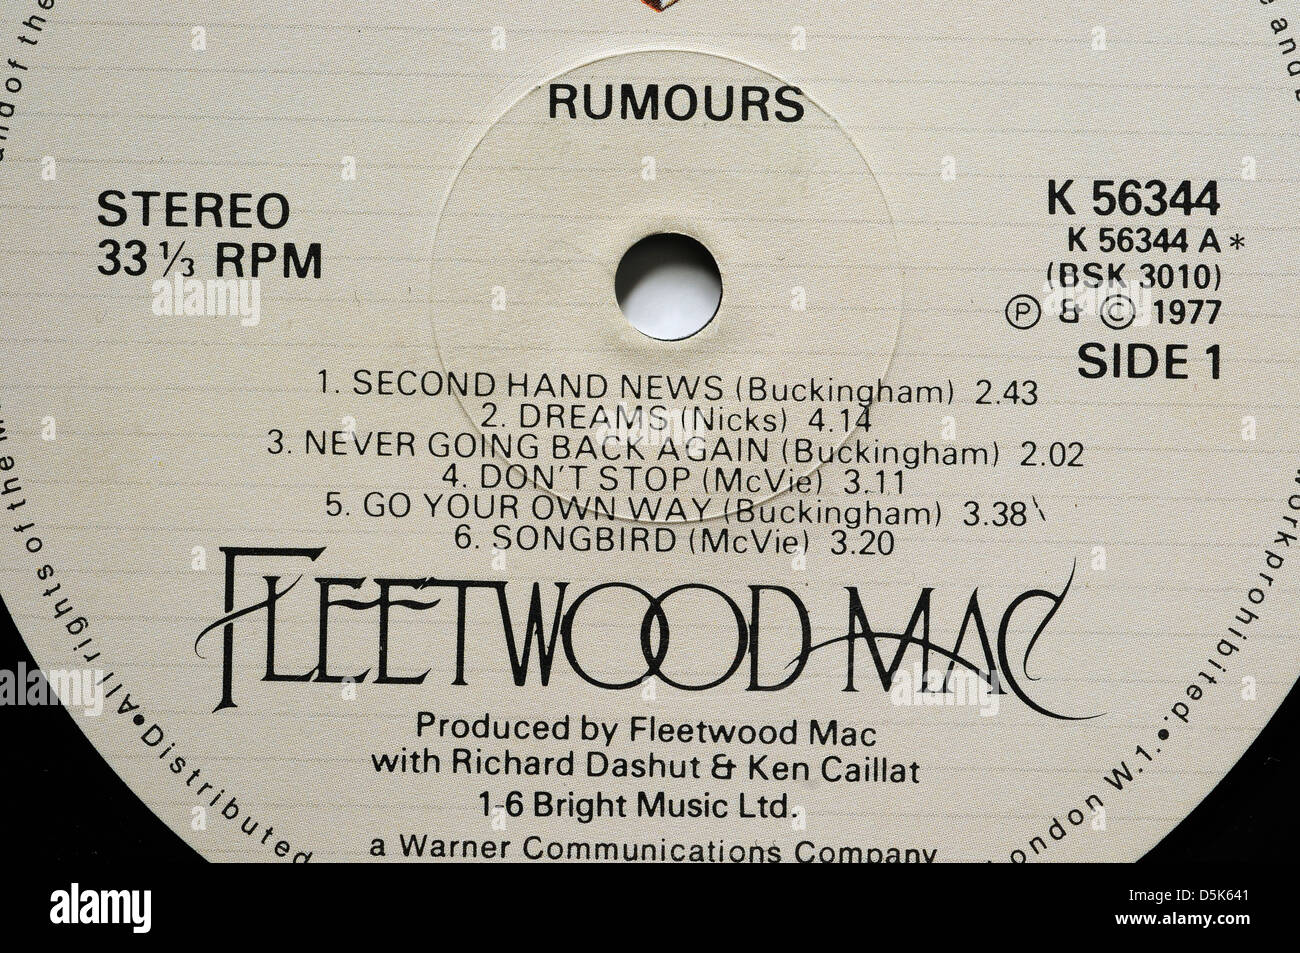 Fleetwood Mac Rumours album label with classic tracks Dreams and Go Your Own Way Stock Photo